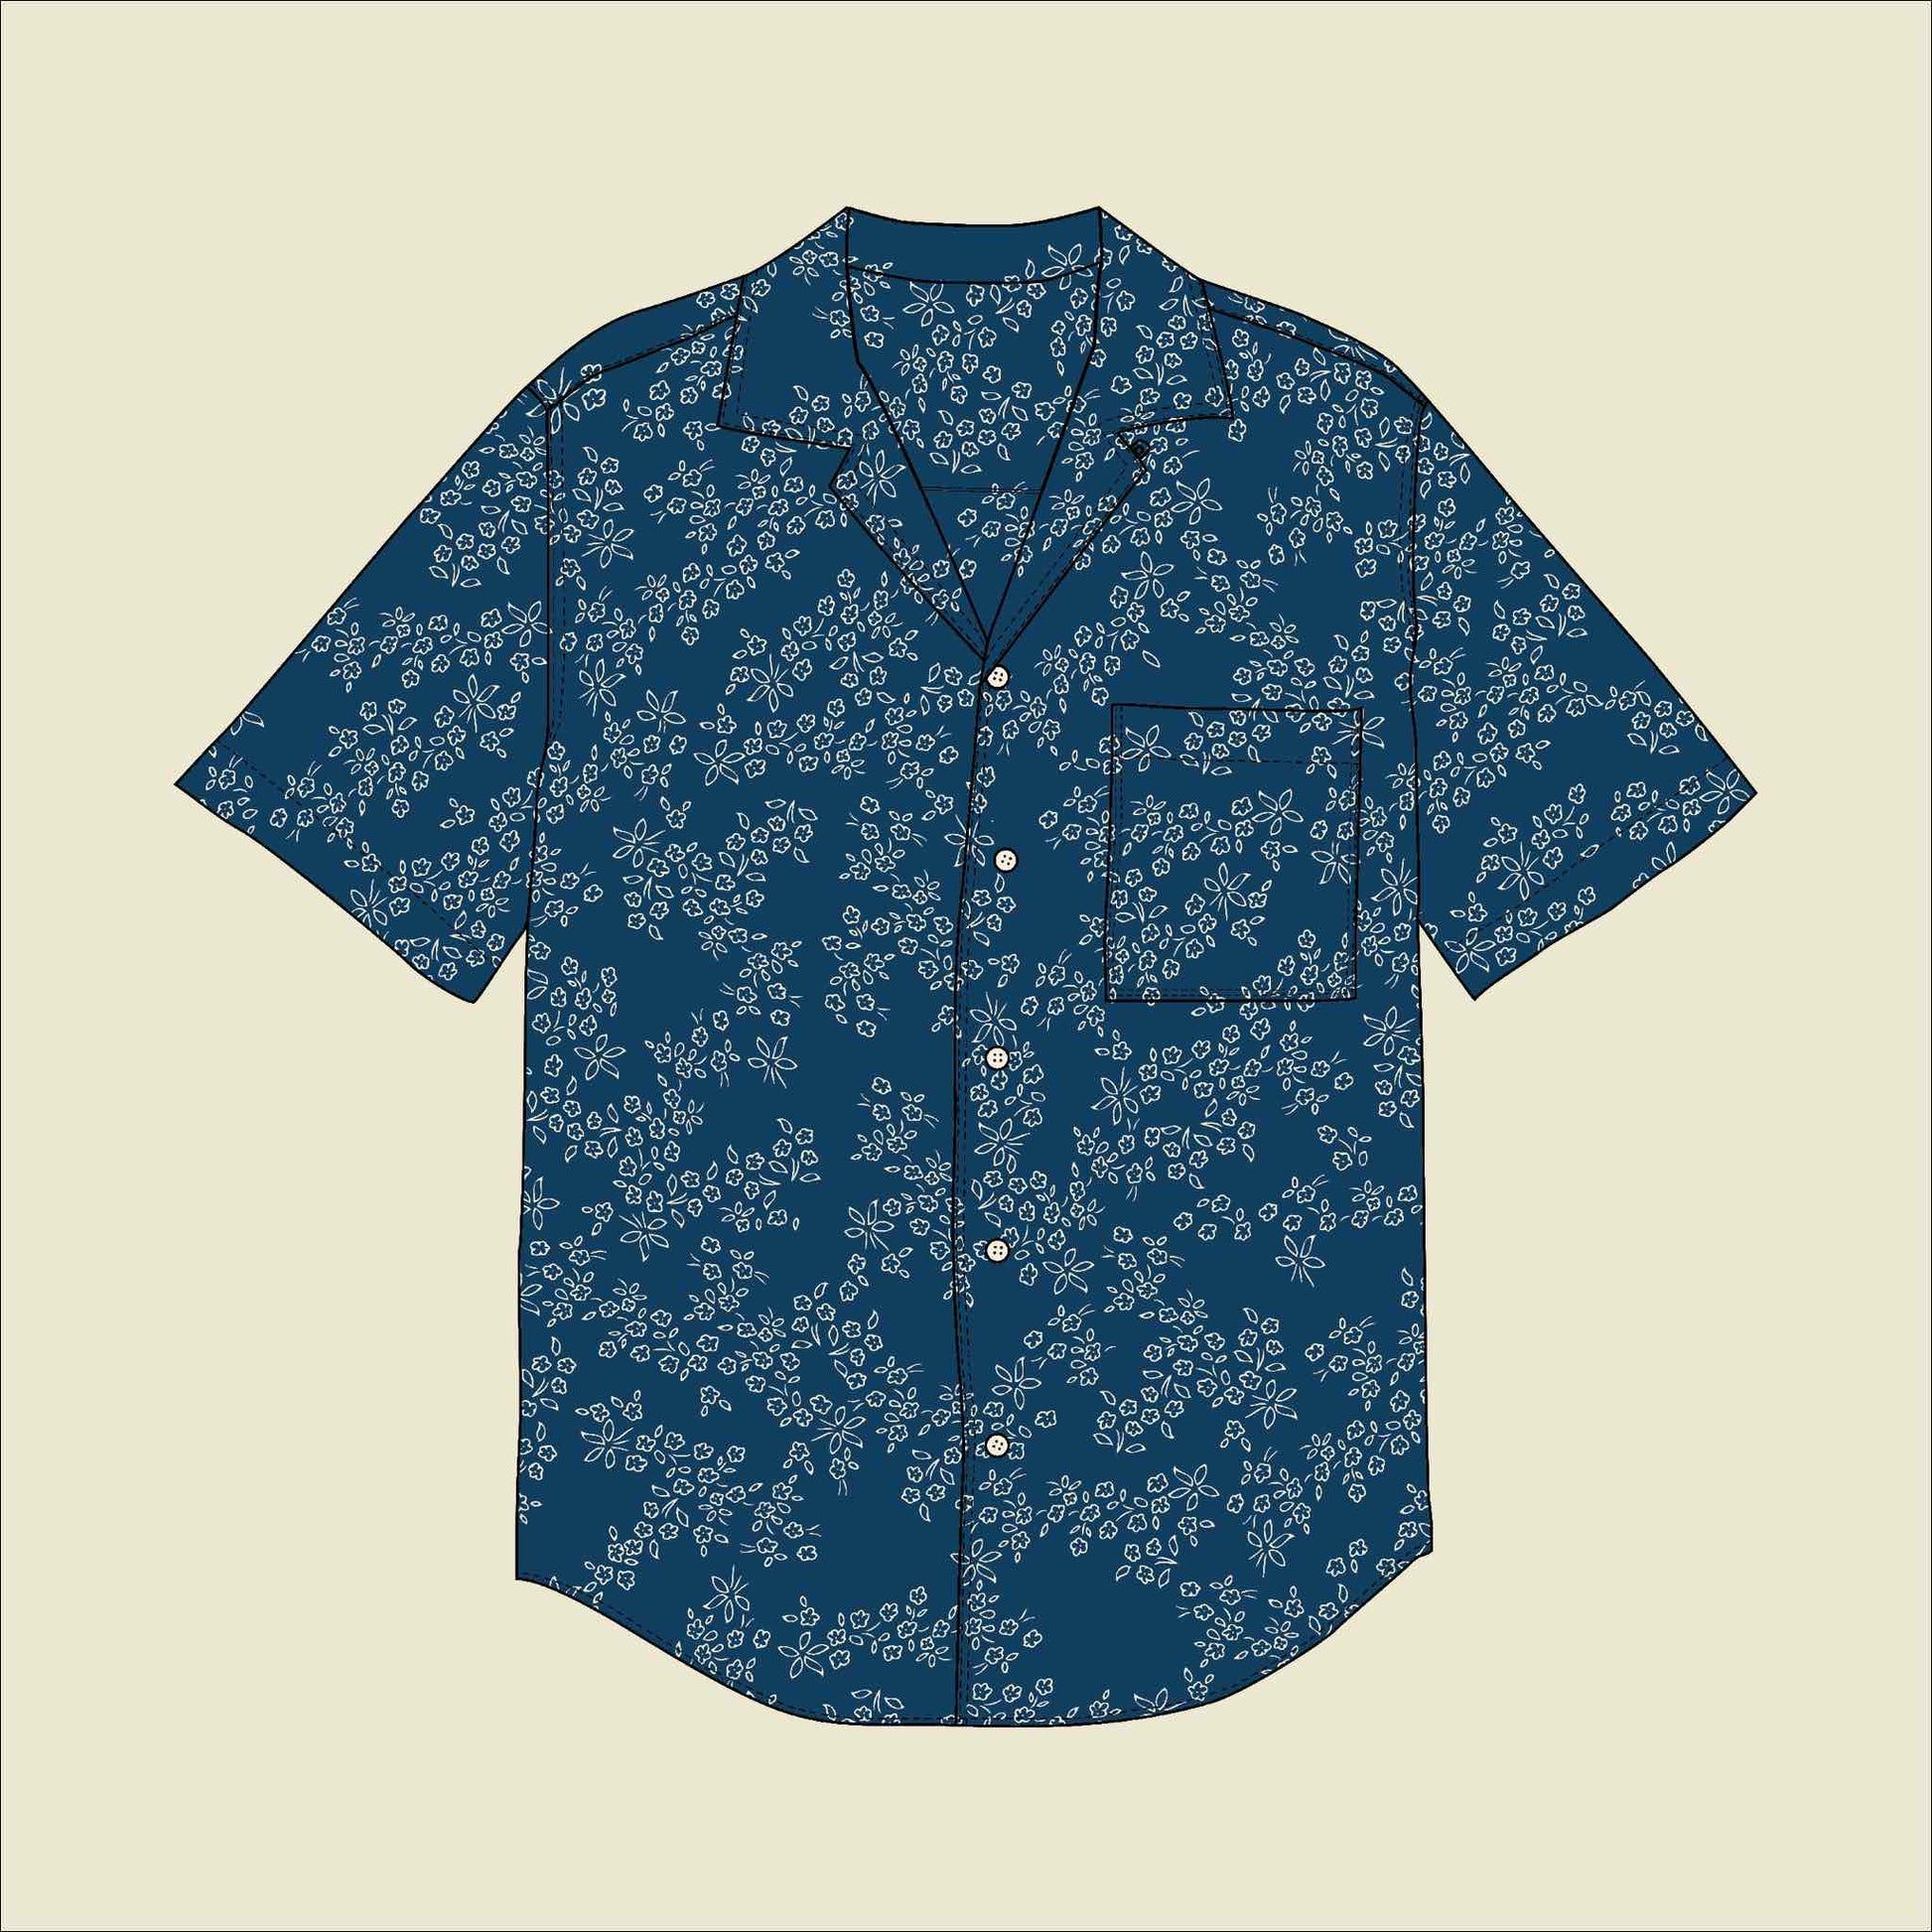 Men's Camp Collar Shirt Sewing Kit - Downloadable Pattern, Cotton Fabric, Tutorials in Ditsy Floral Blue Design Sizes Youth to Men's Plus 7XL